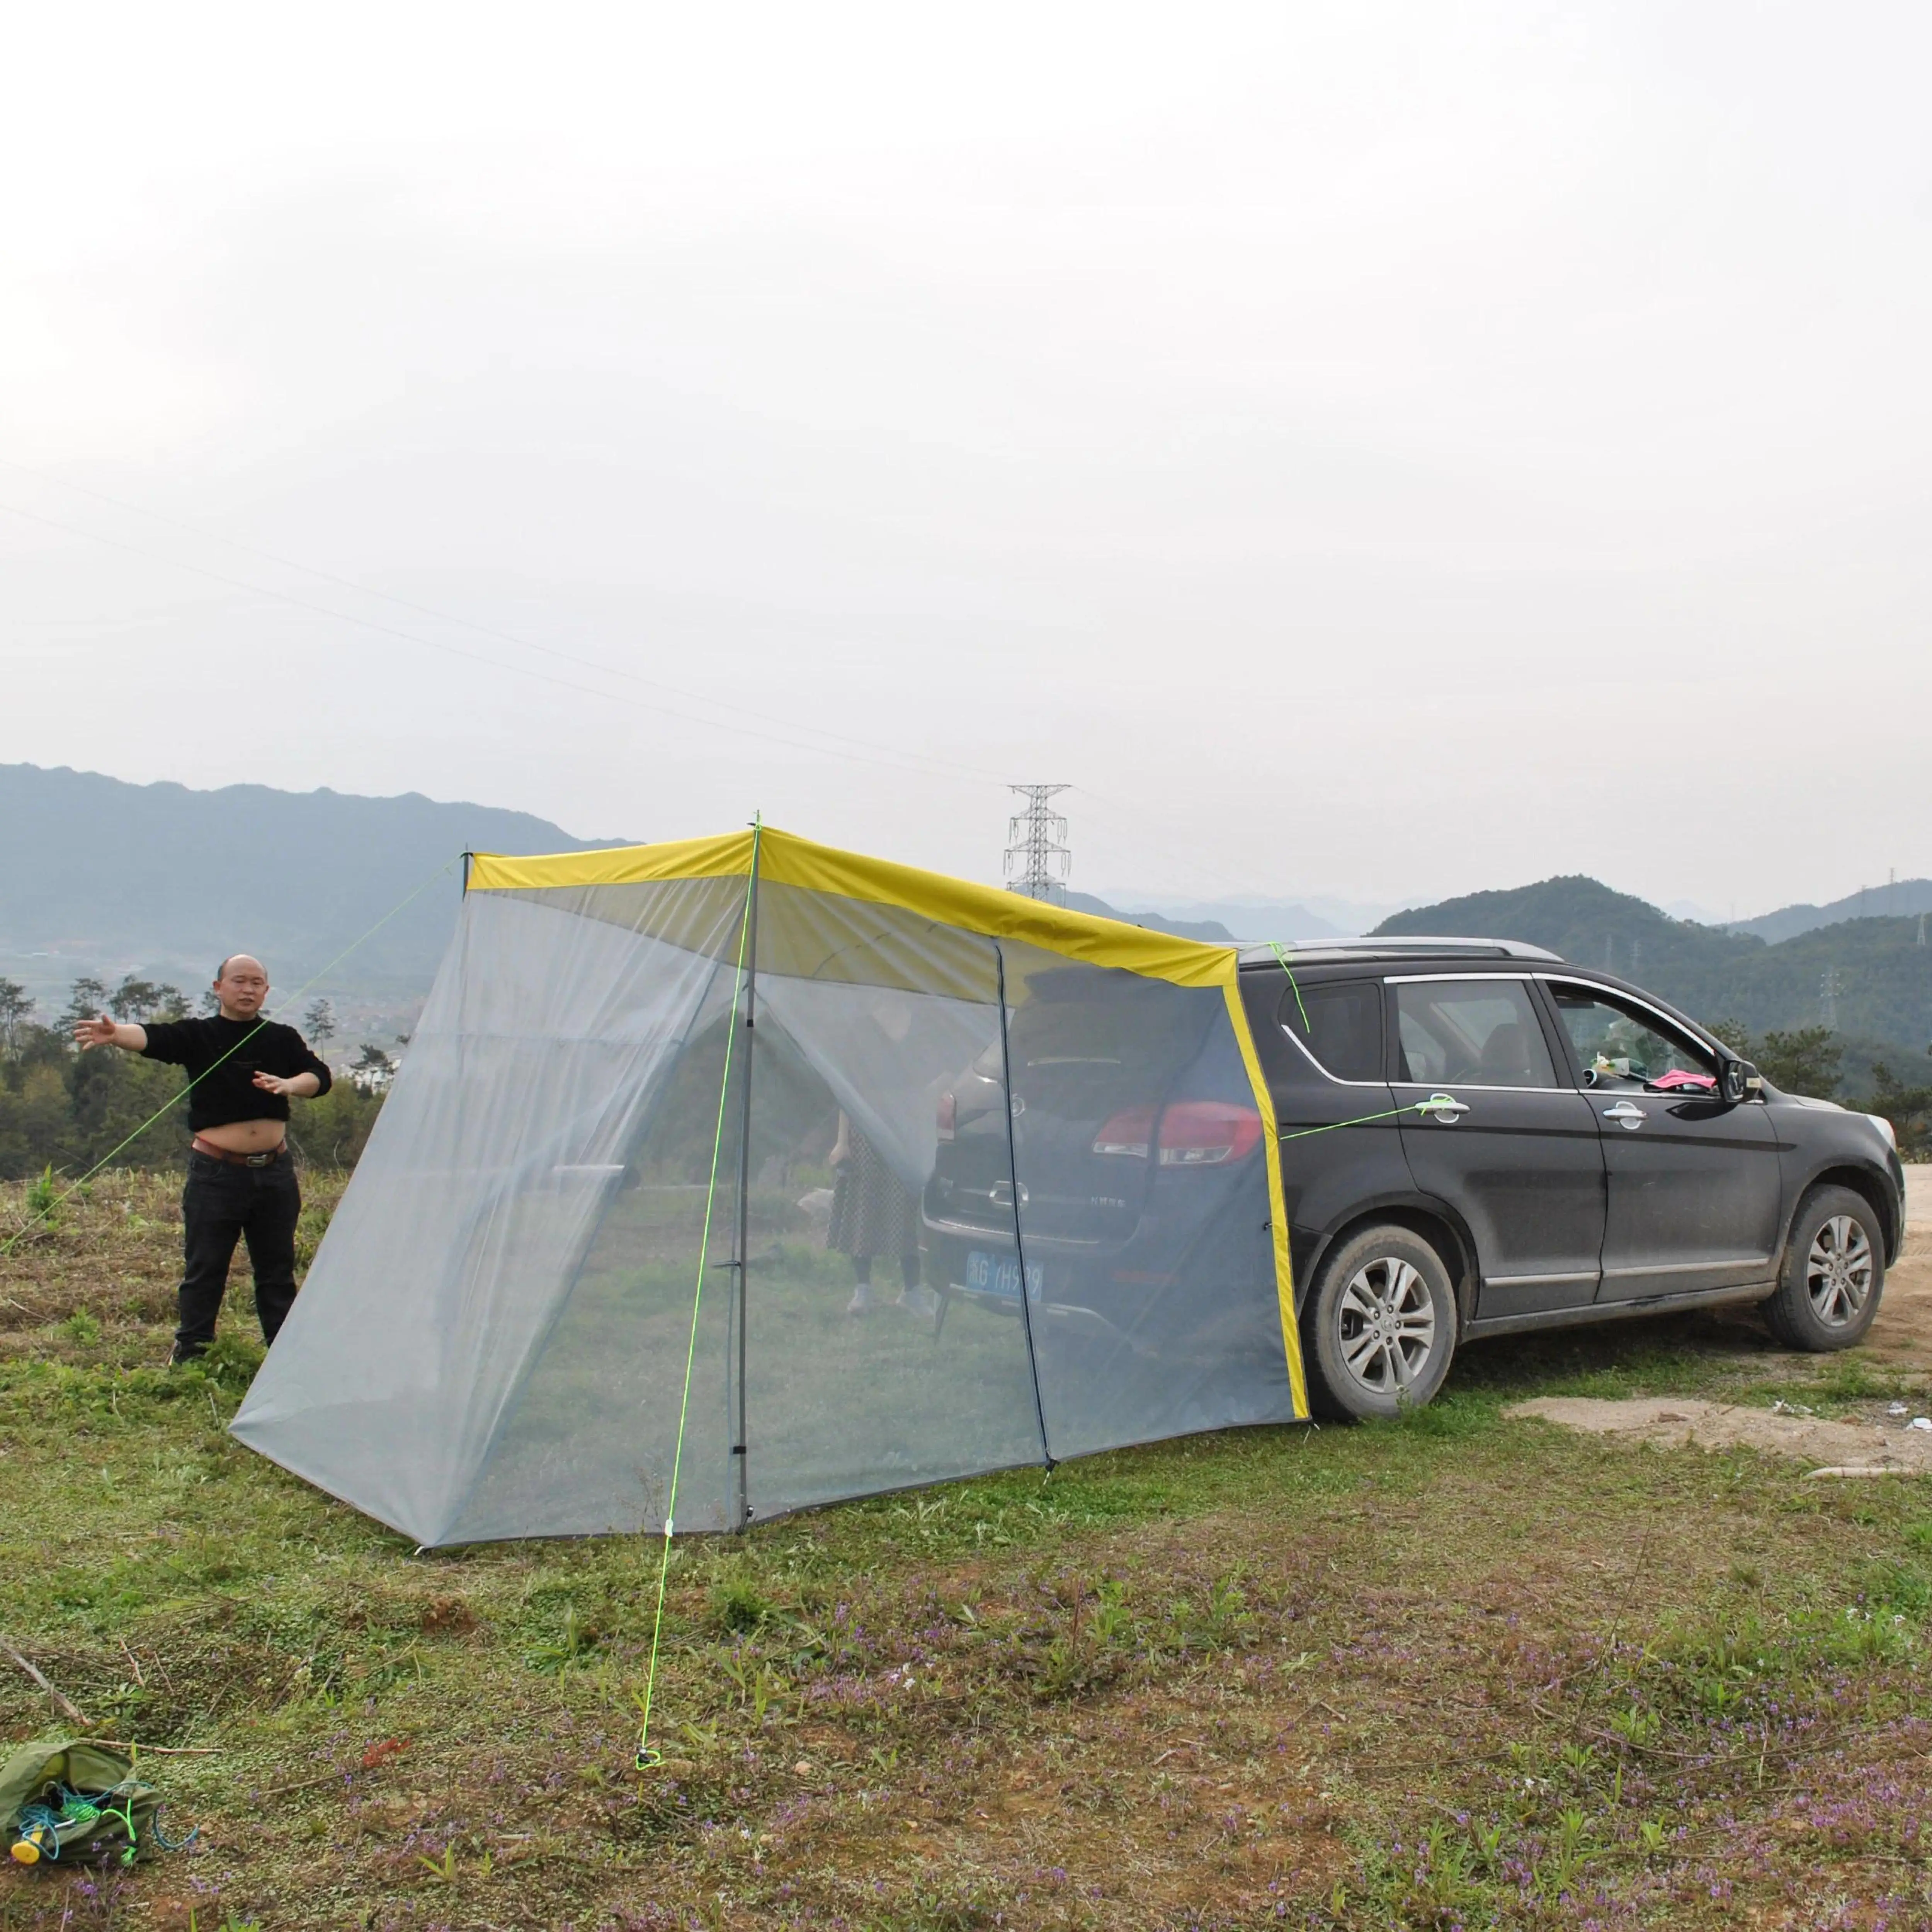 

CZX-580 Car Rear Tent Awning - Sun Shelter Portable Waterproof Roof Top Tent For SUV Mosquito Net Camping Outdoor Car Tent